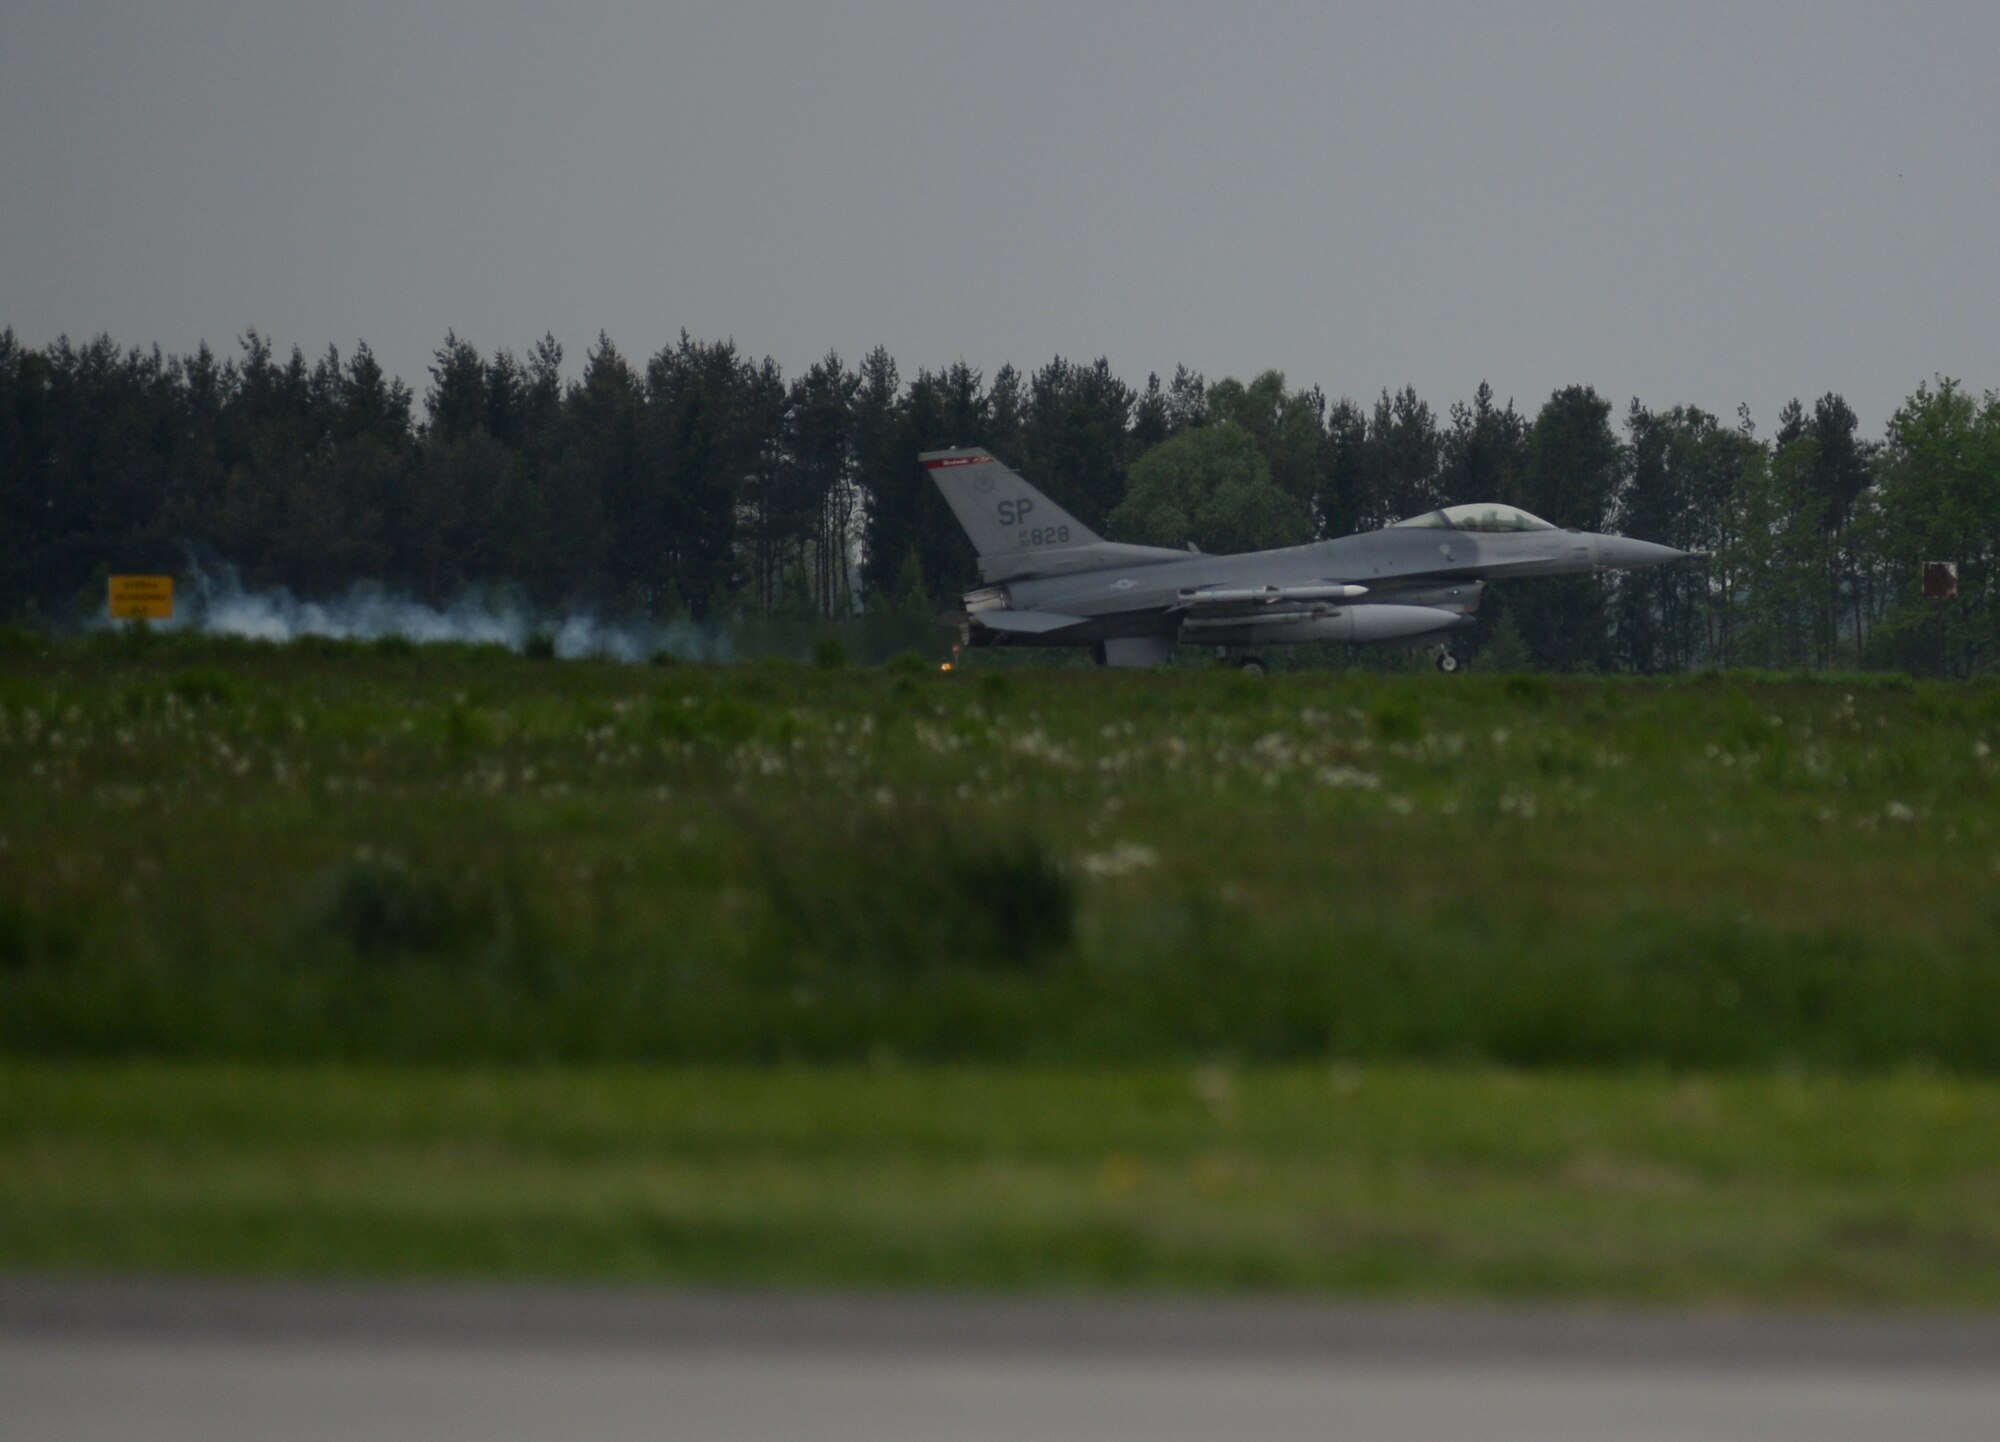 An F-16 Fighting Falcon fighter aircraft pilot lands an aircraft on the flightline at Łask Air Base, Poland, May 7, 2014. The U.S. Air Force and Polish air force maintain close ties with respect to training and partnership defense as part of the NATO alliance. (U.S. Air Force photo by Staff Sgt. Joe W. McFadden/Released)